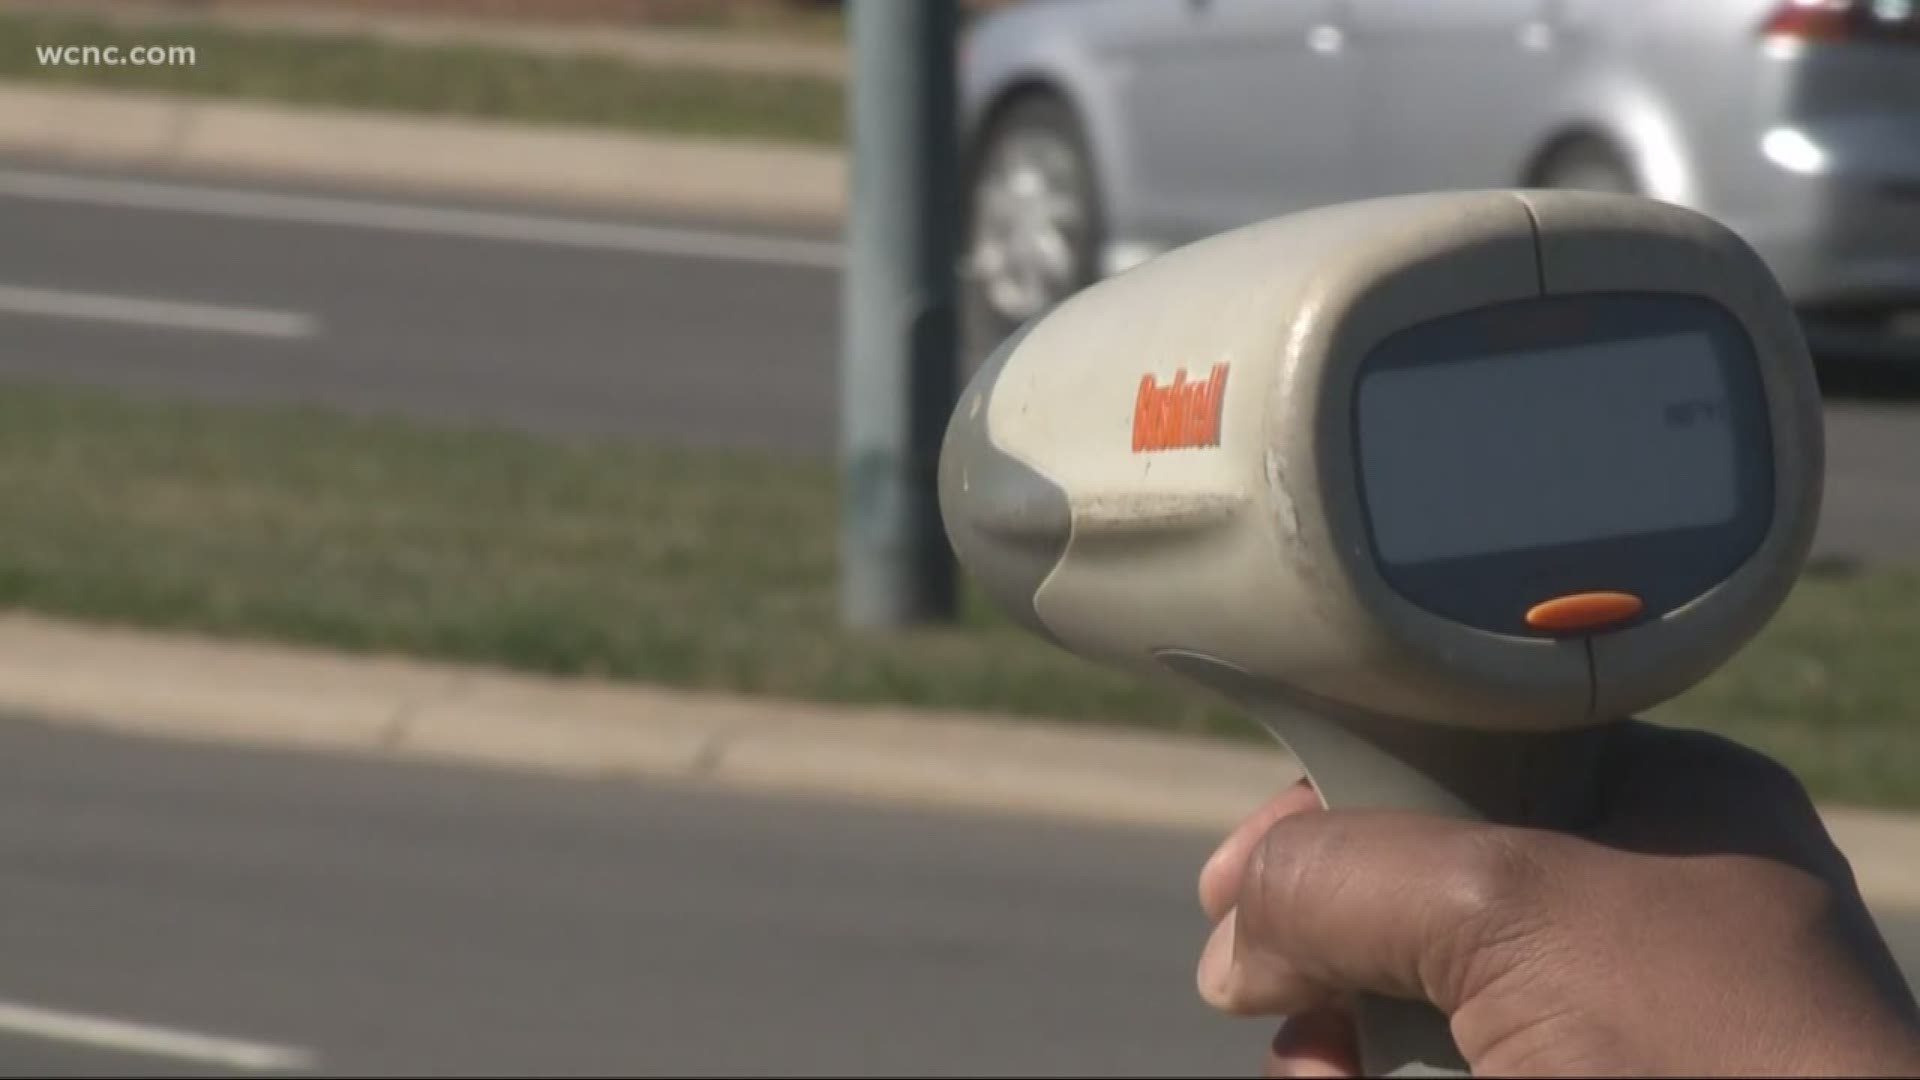 After CMPD posted photos of it's speed enforcement patrols on the job, people began asking how they could get patrols on their streets.